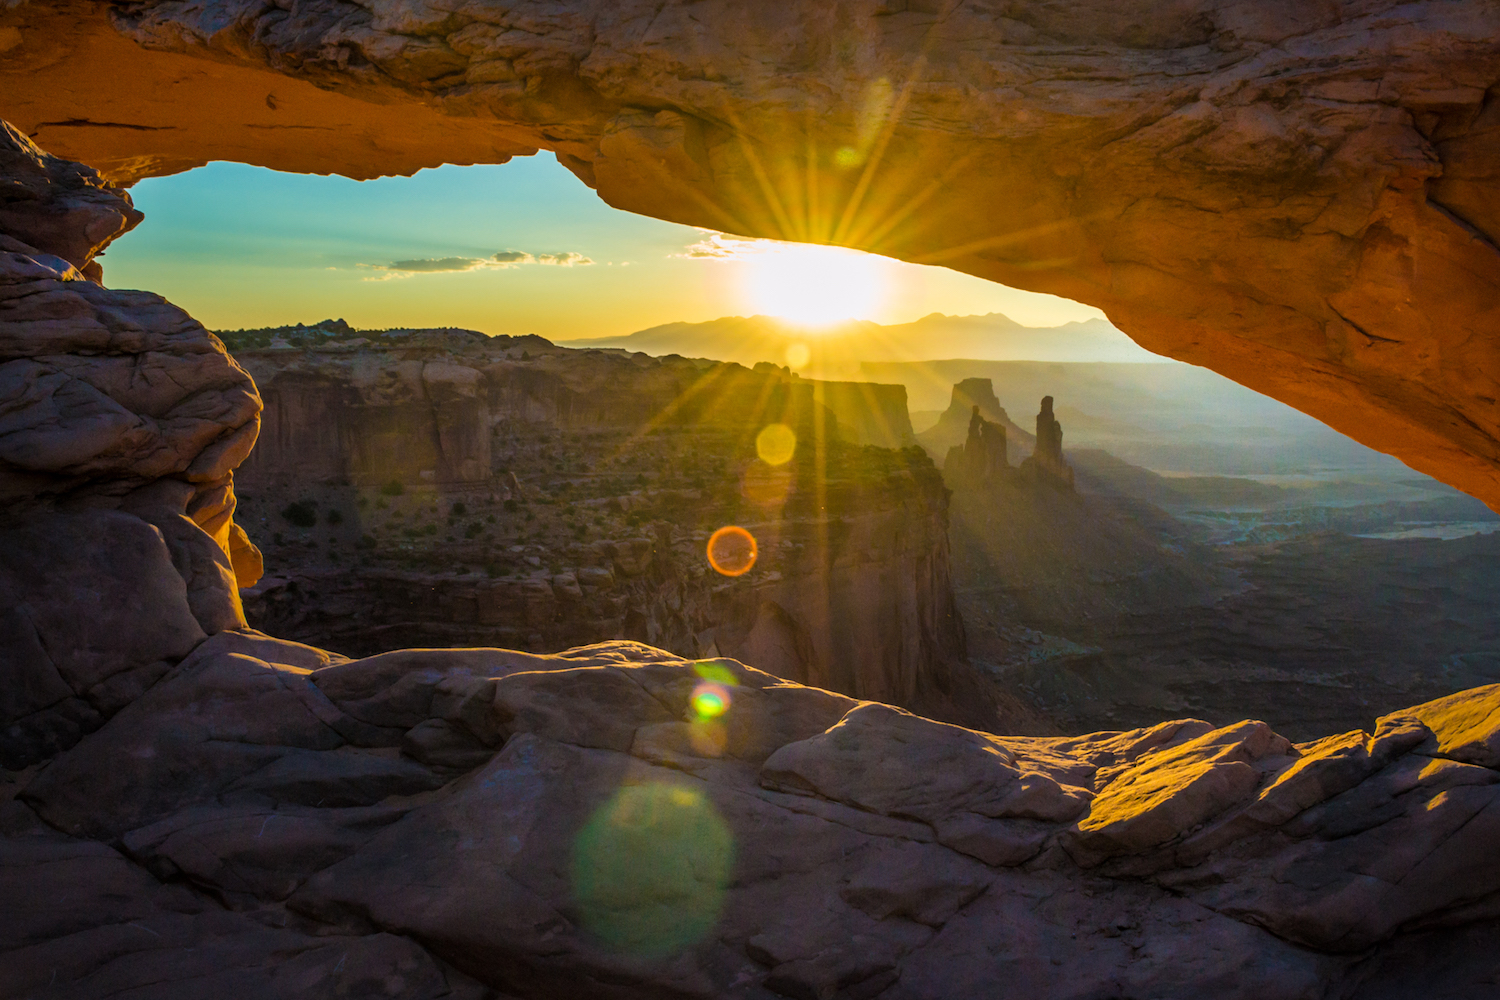 The sunrise under the Mesa Arch at Canyonlands National Park.